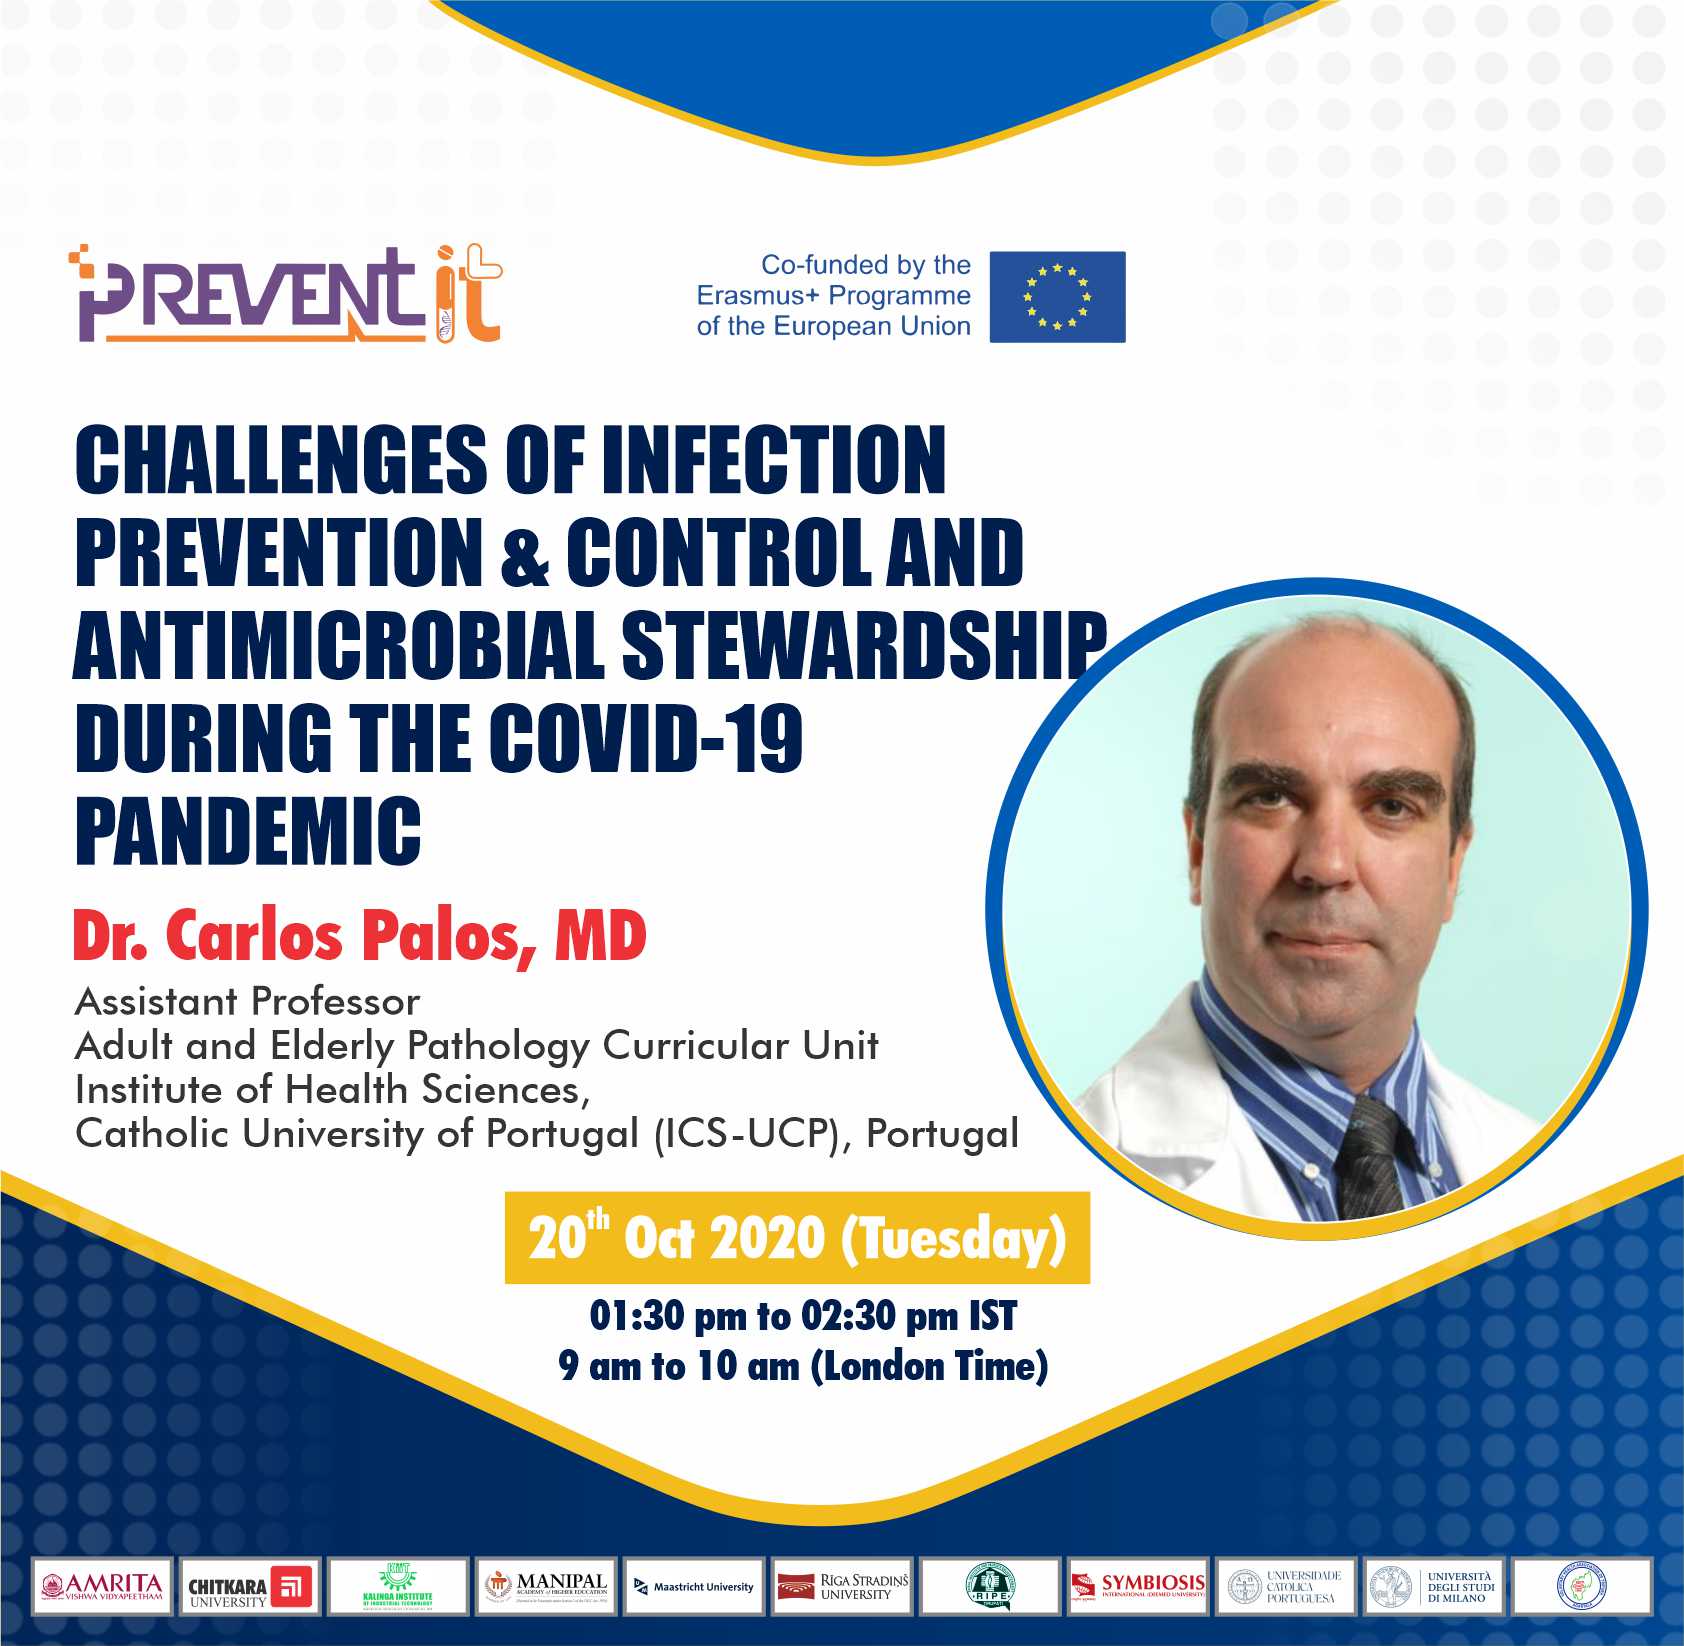 Challenges of Infection Prevention & Control during the COVID-19 pandemic.